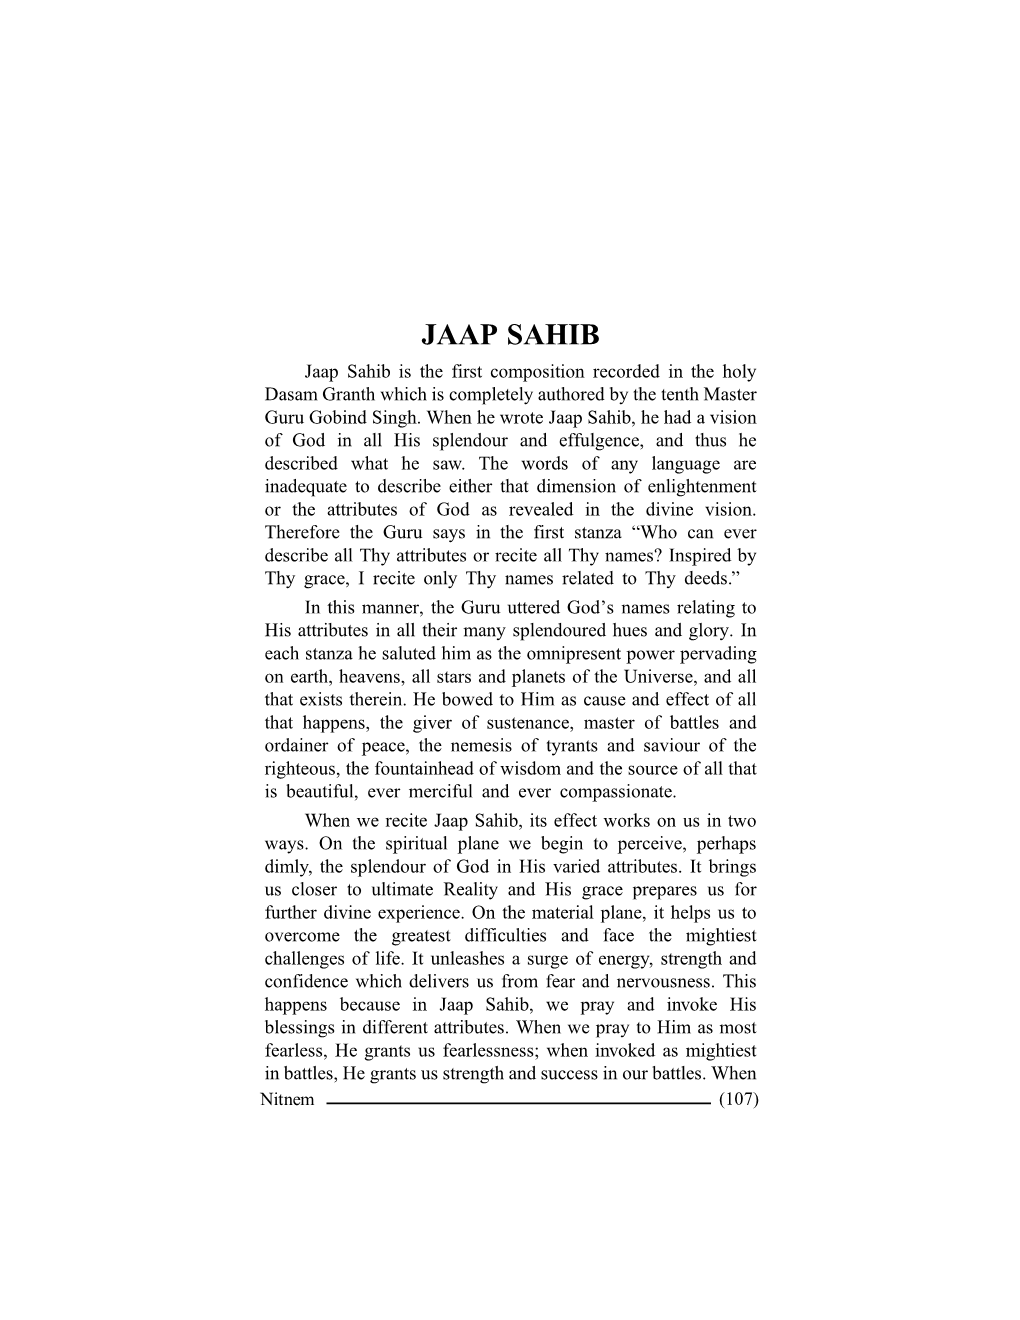 JAAP SAHIB Jaap Sah Ib Is the First Com Position Recorded in the H Oly Dasam Granth W H Ich Is Com Pletely Authored by the Tenth M Aster Guru Gobind Singh